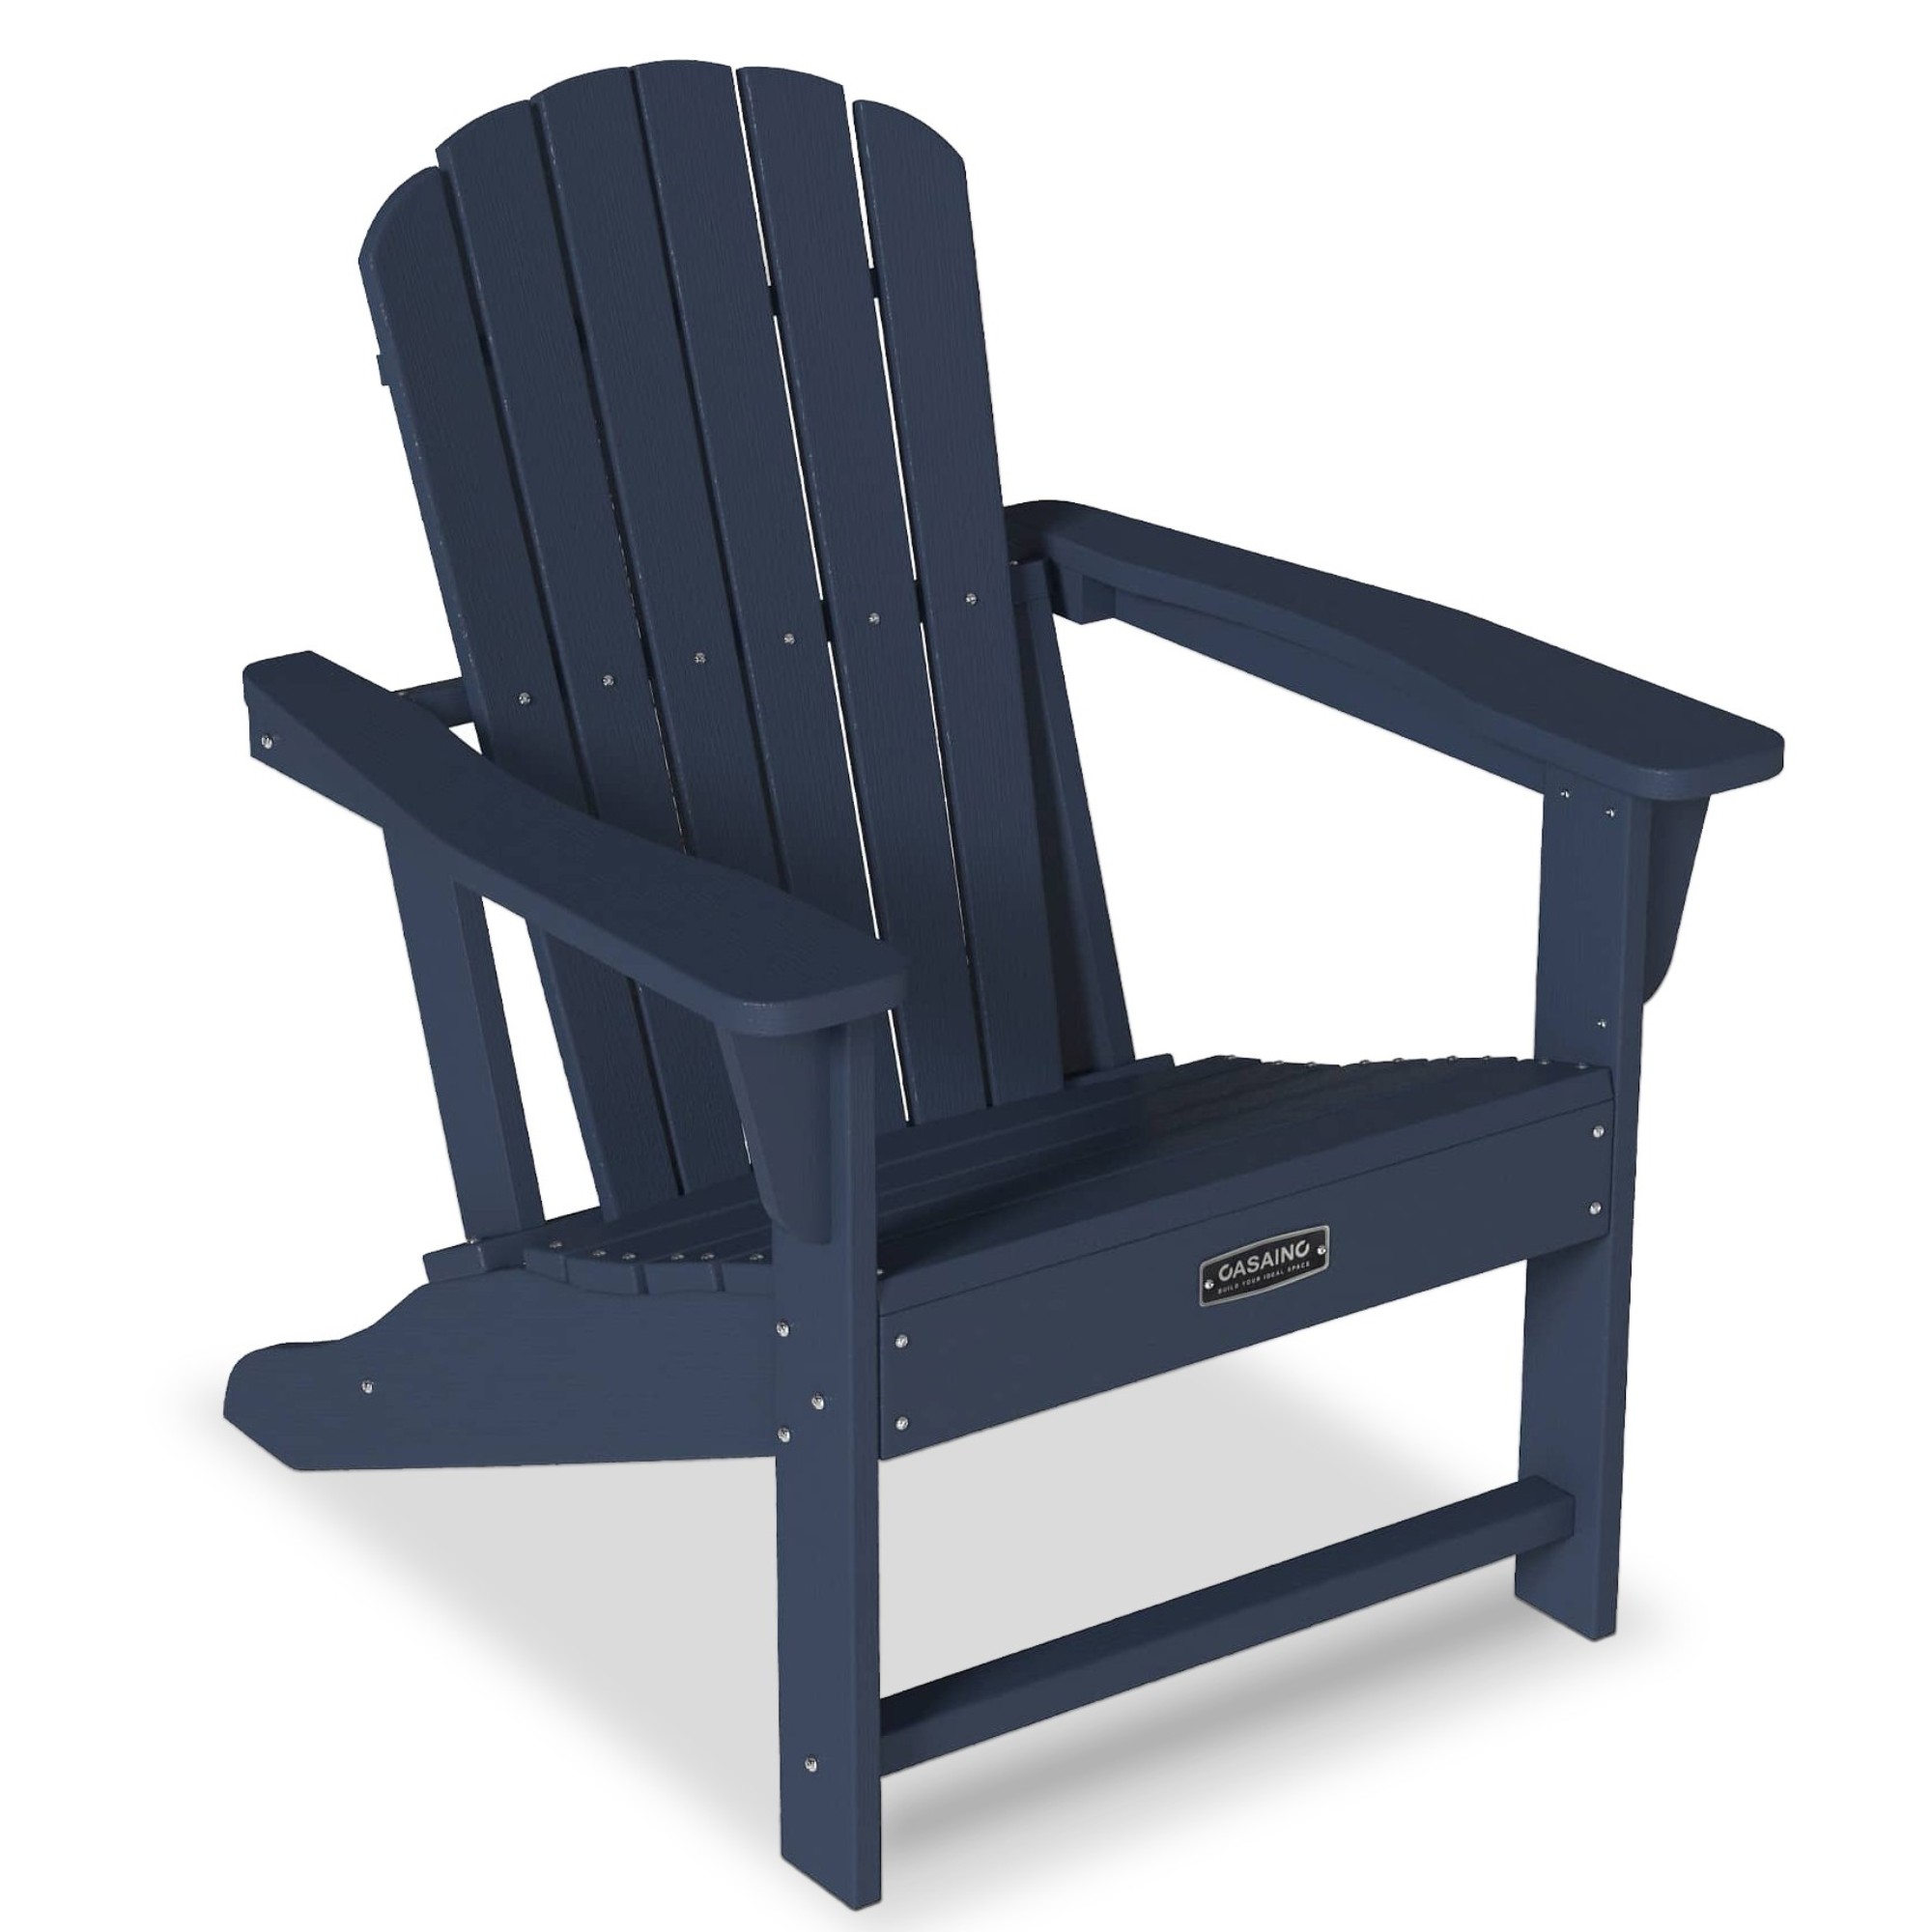 PS Board 6 back panel fixed Outdoor Adirondack chair a variety of colors, widened armrests 4.7 inches